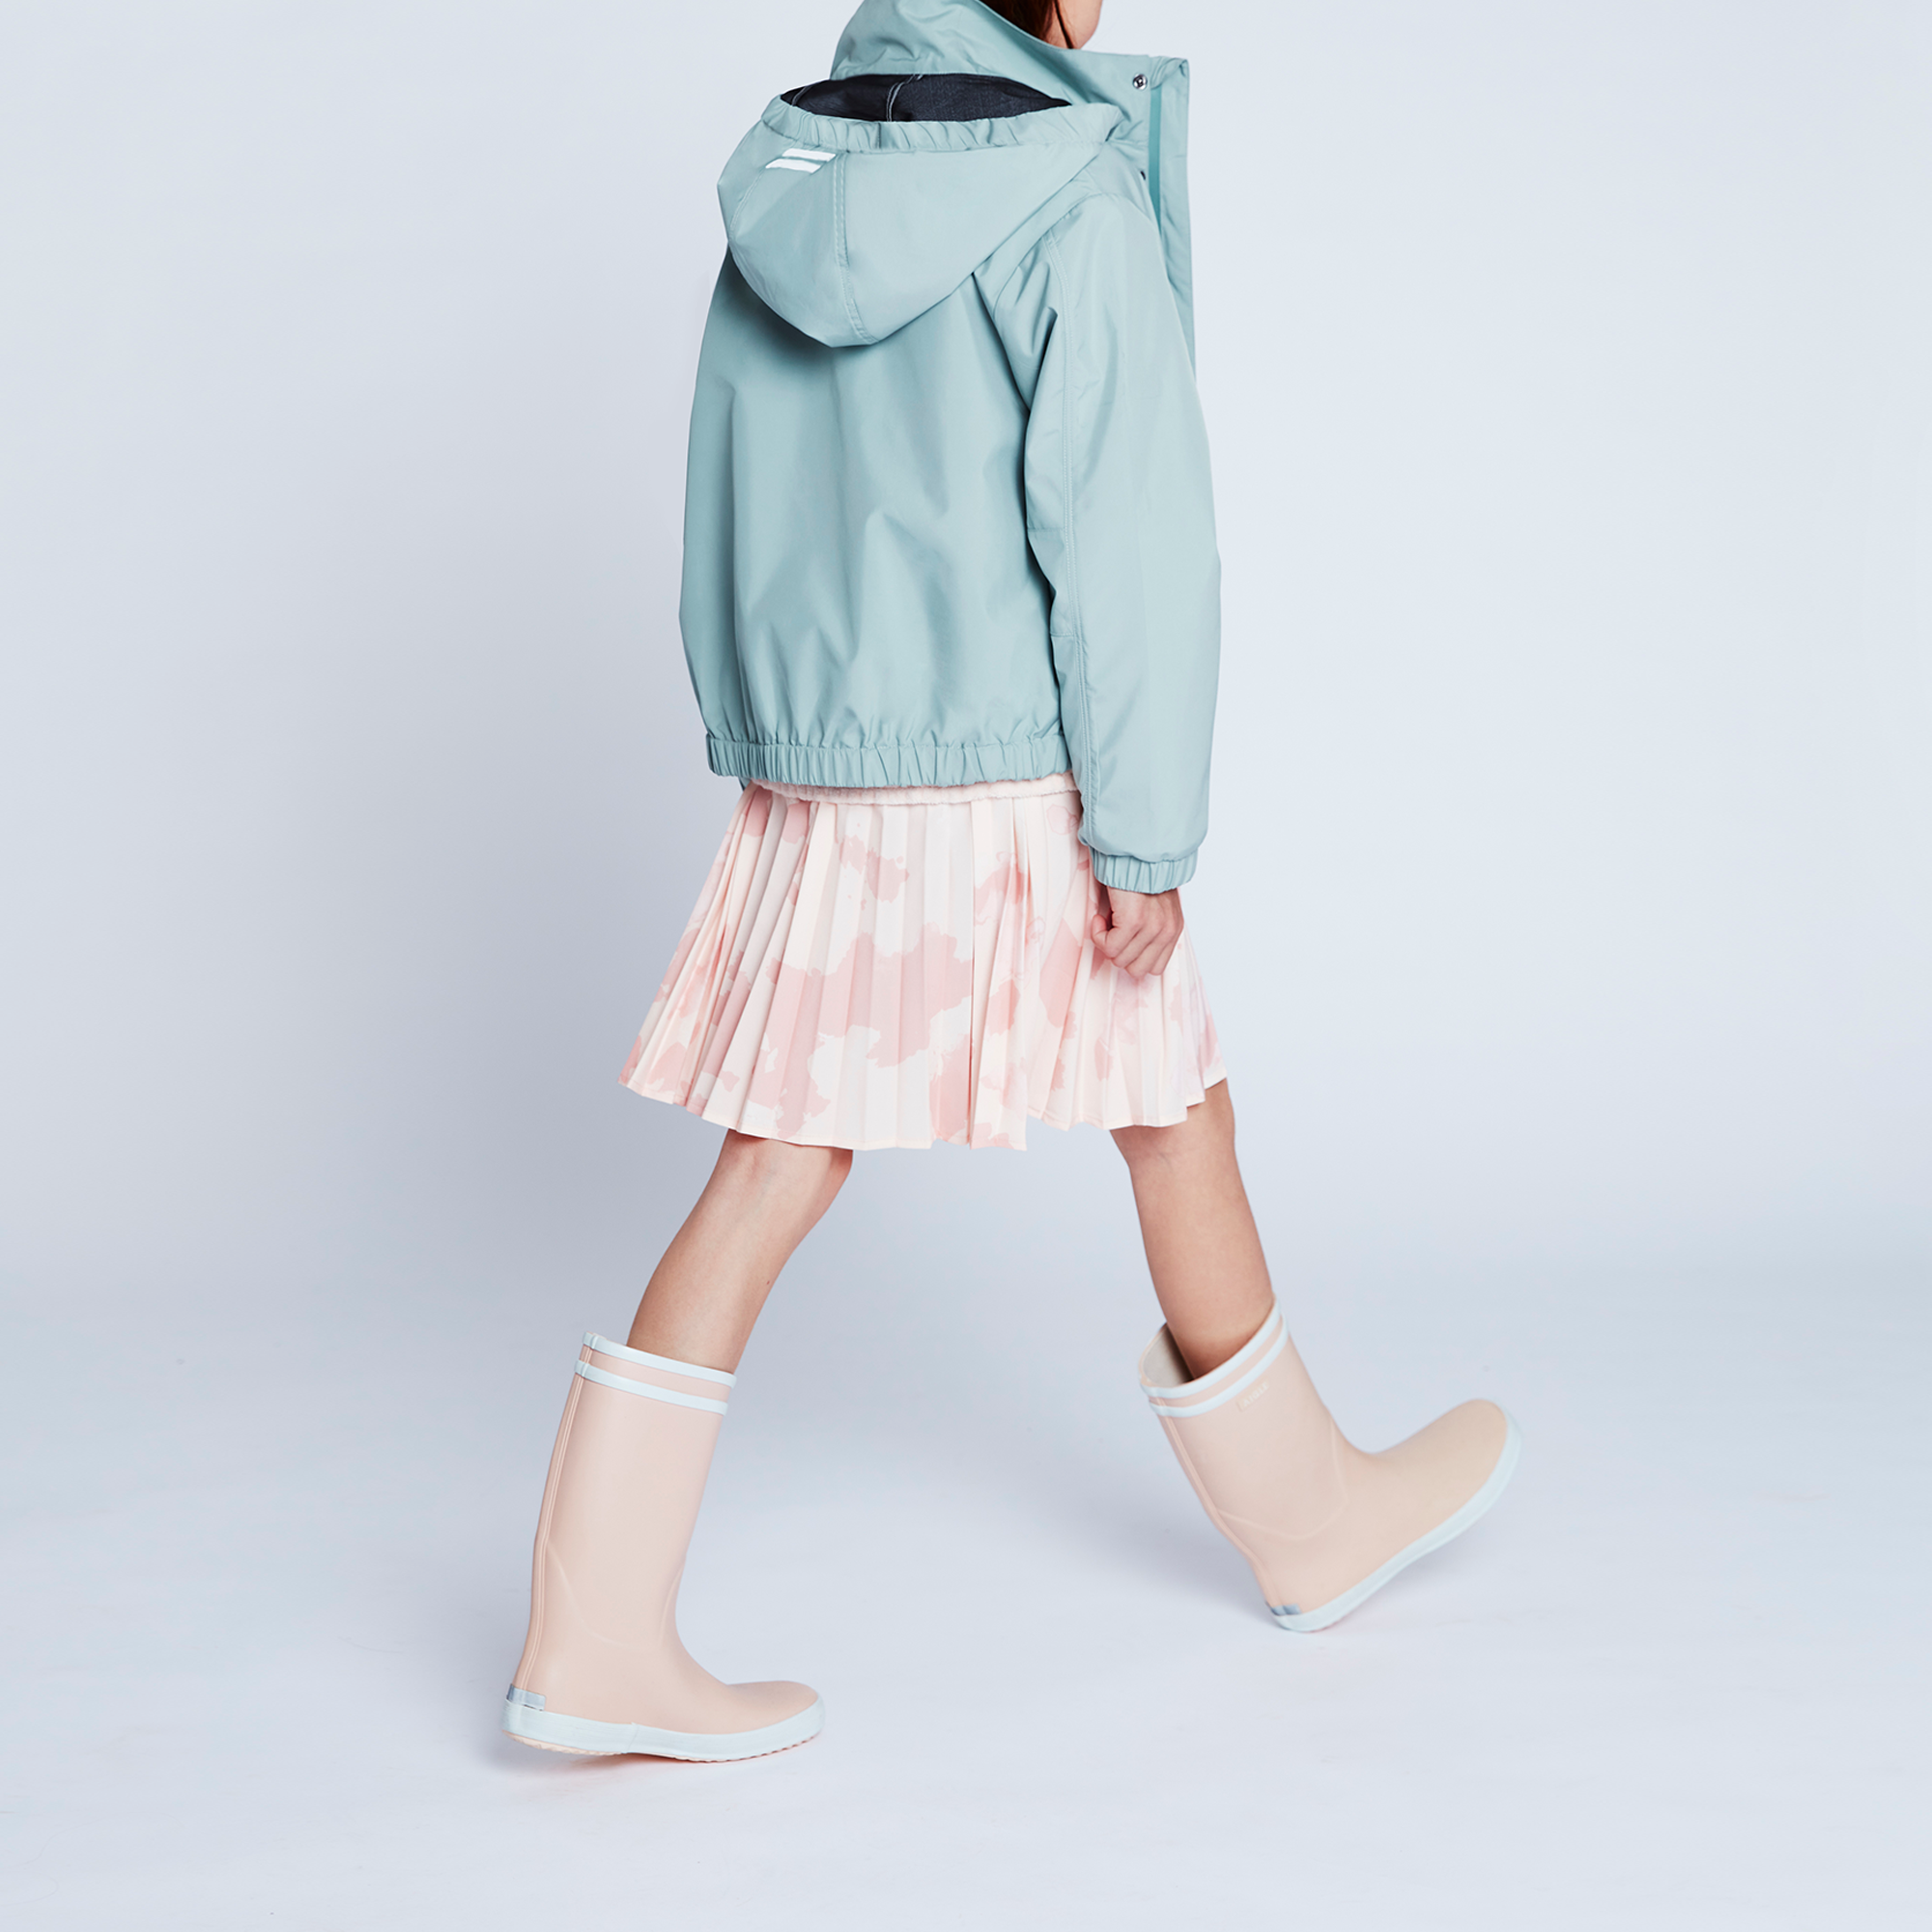 Zip-up hooded parka AIGLE for GIRL